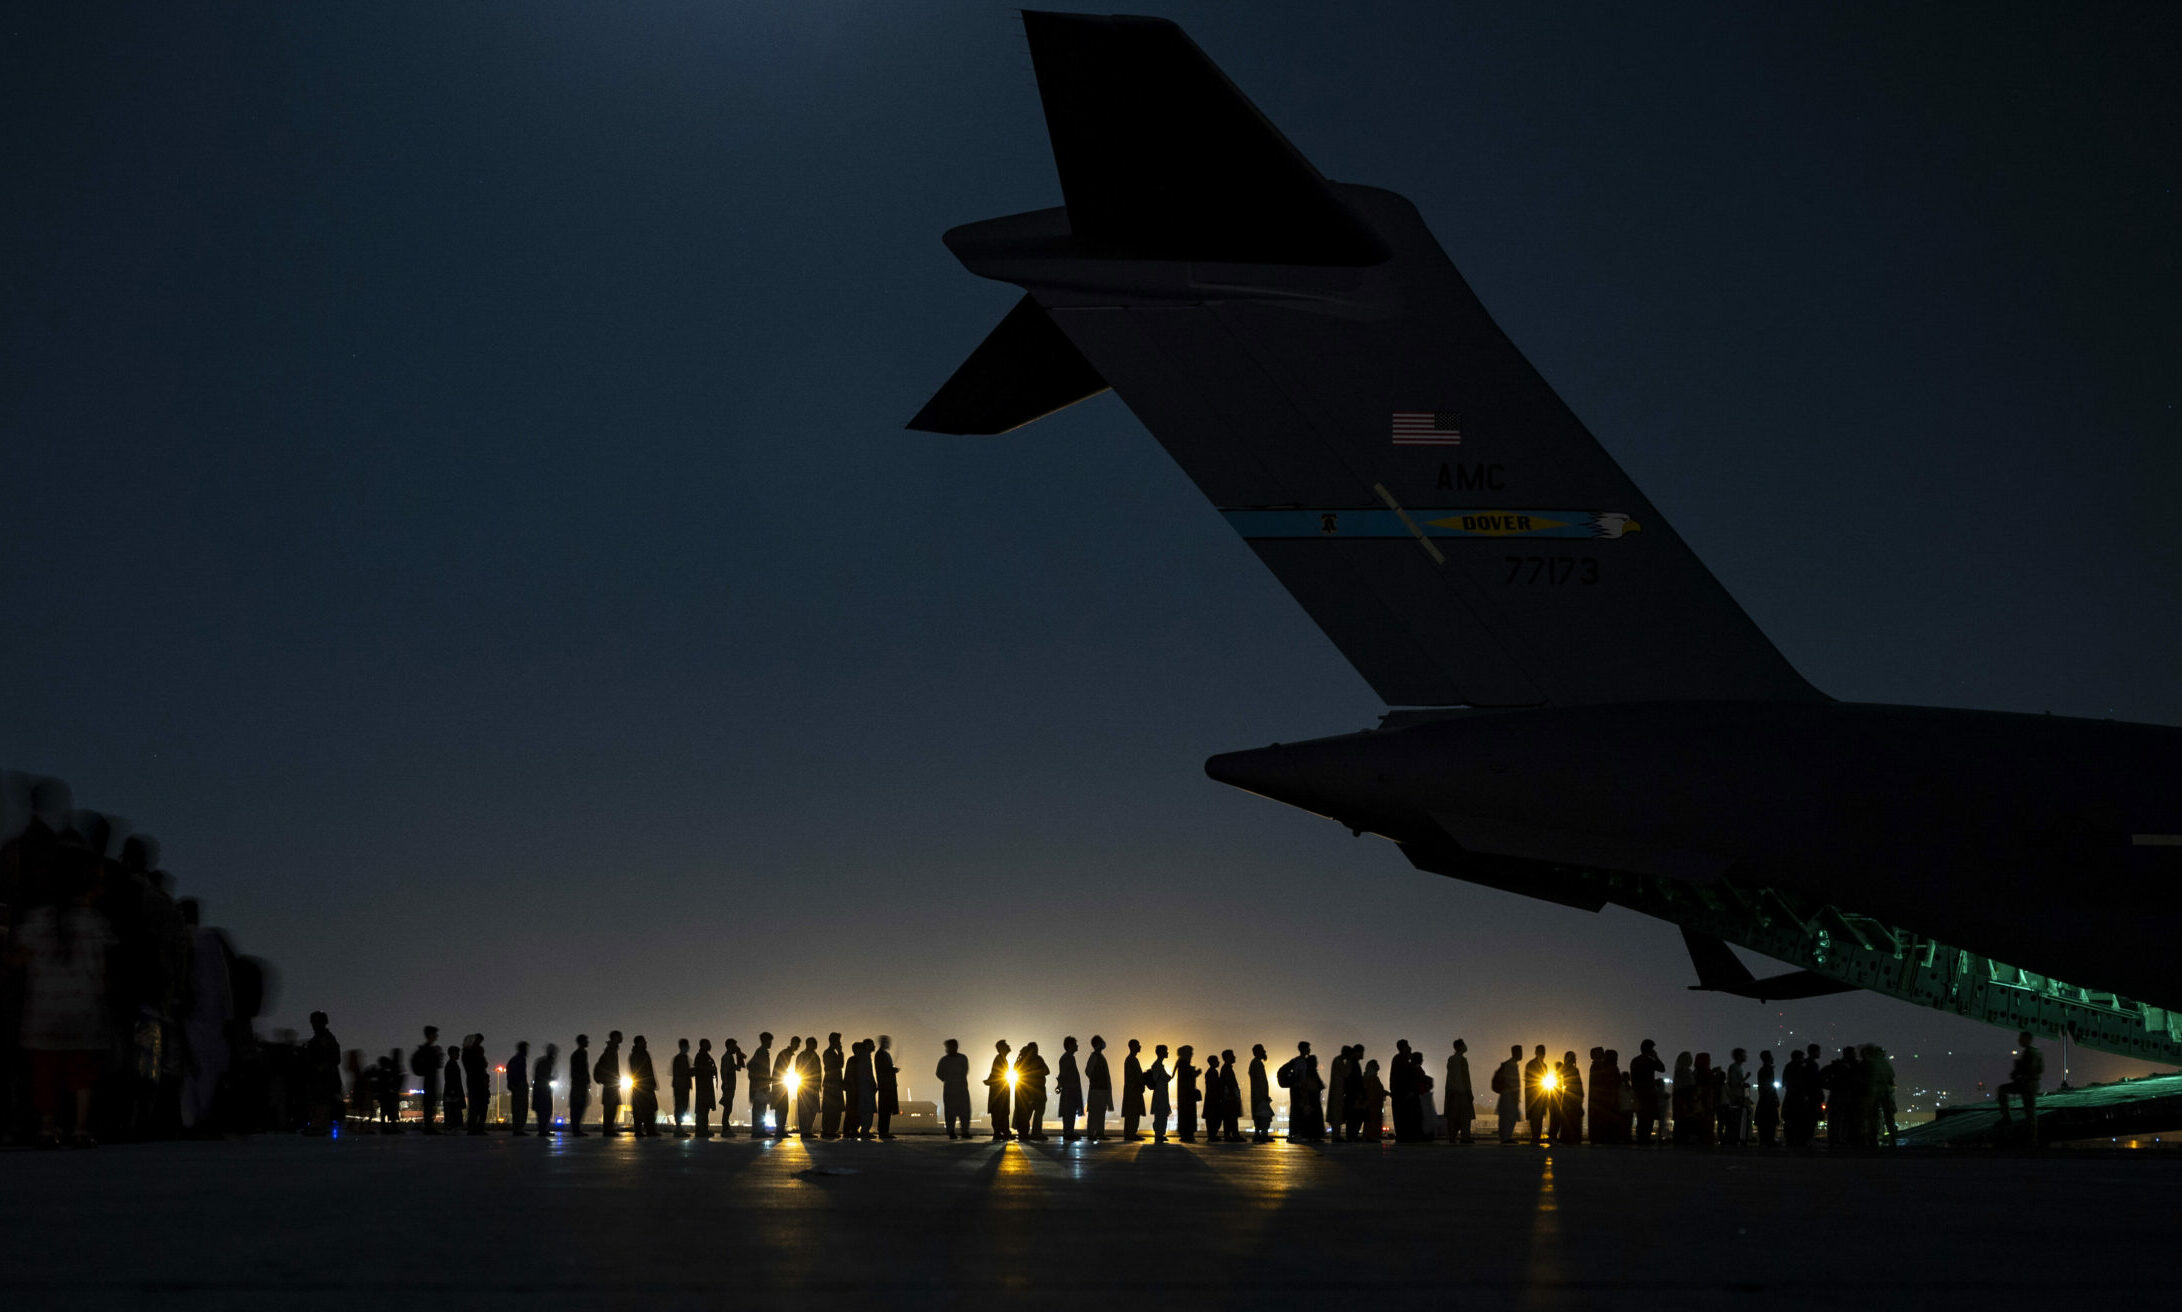 Evacuees from Afganistan boarding military plane at night